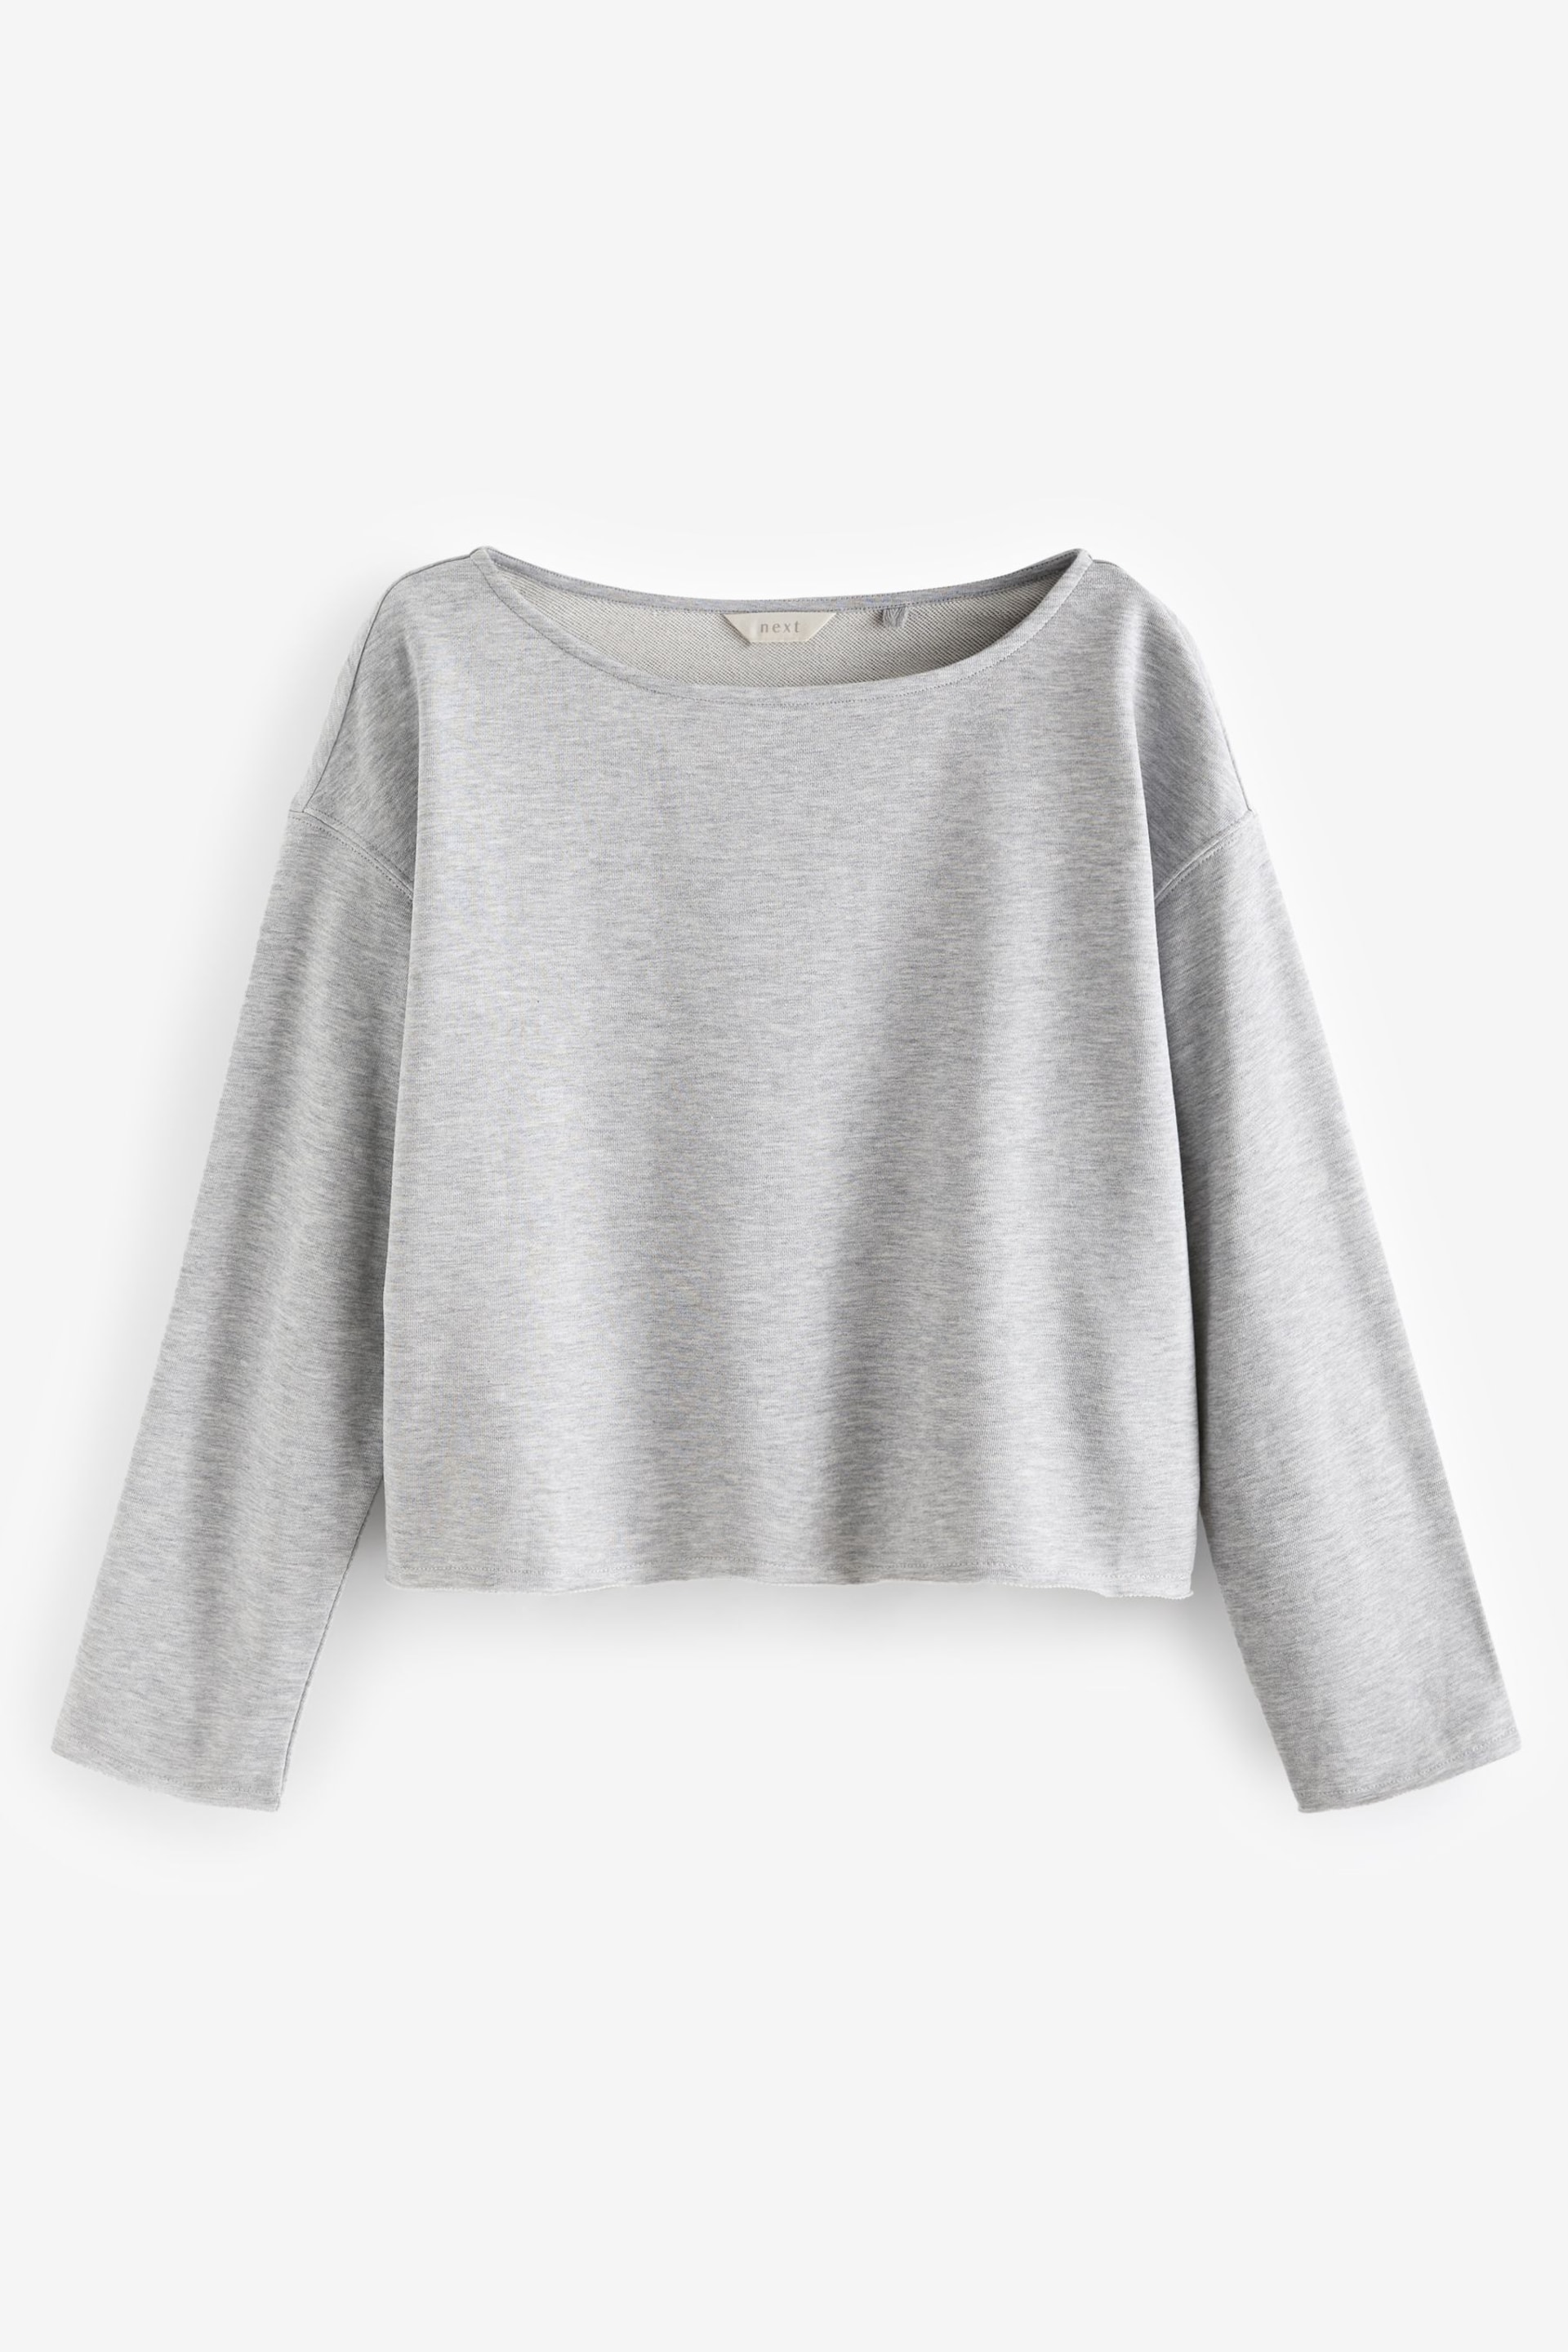 Grey Relaxed Fit Slouch Sweat Top - Image 6 of 7